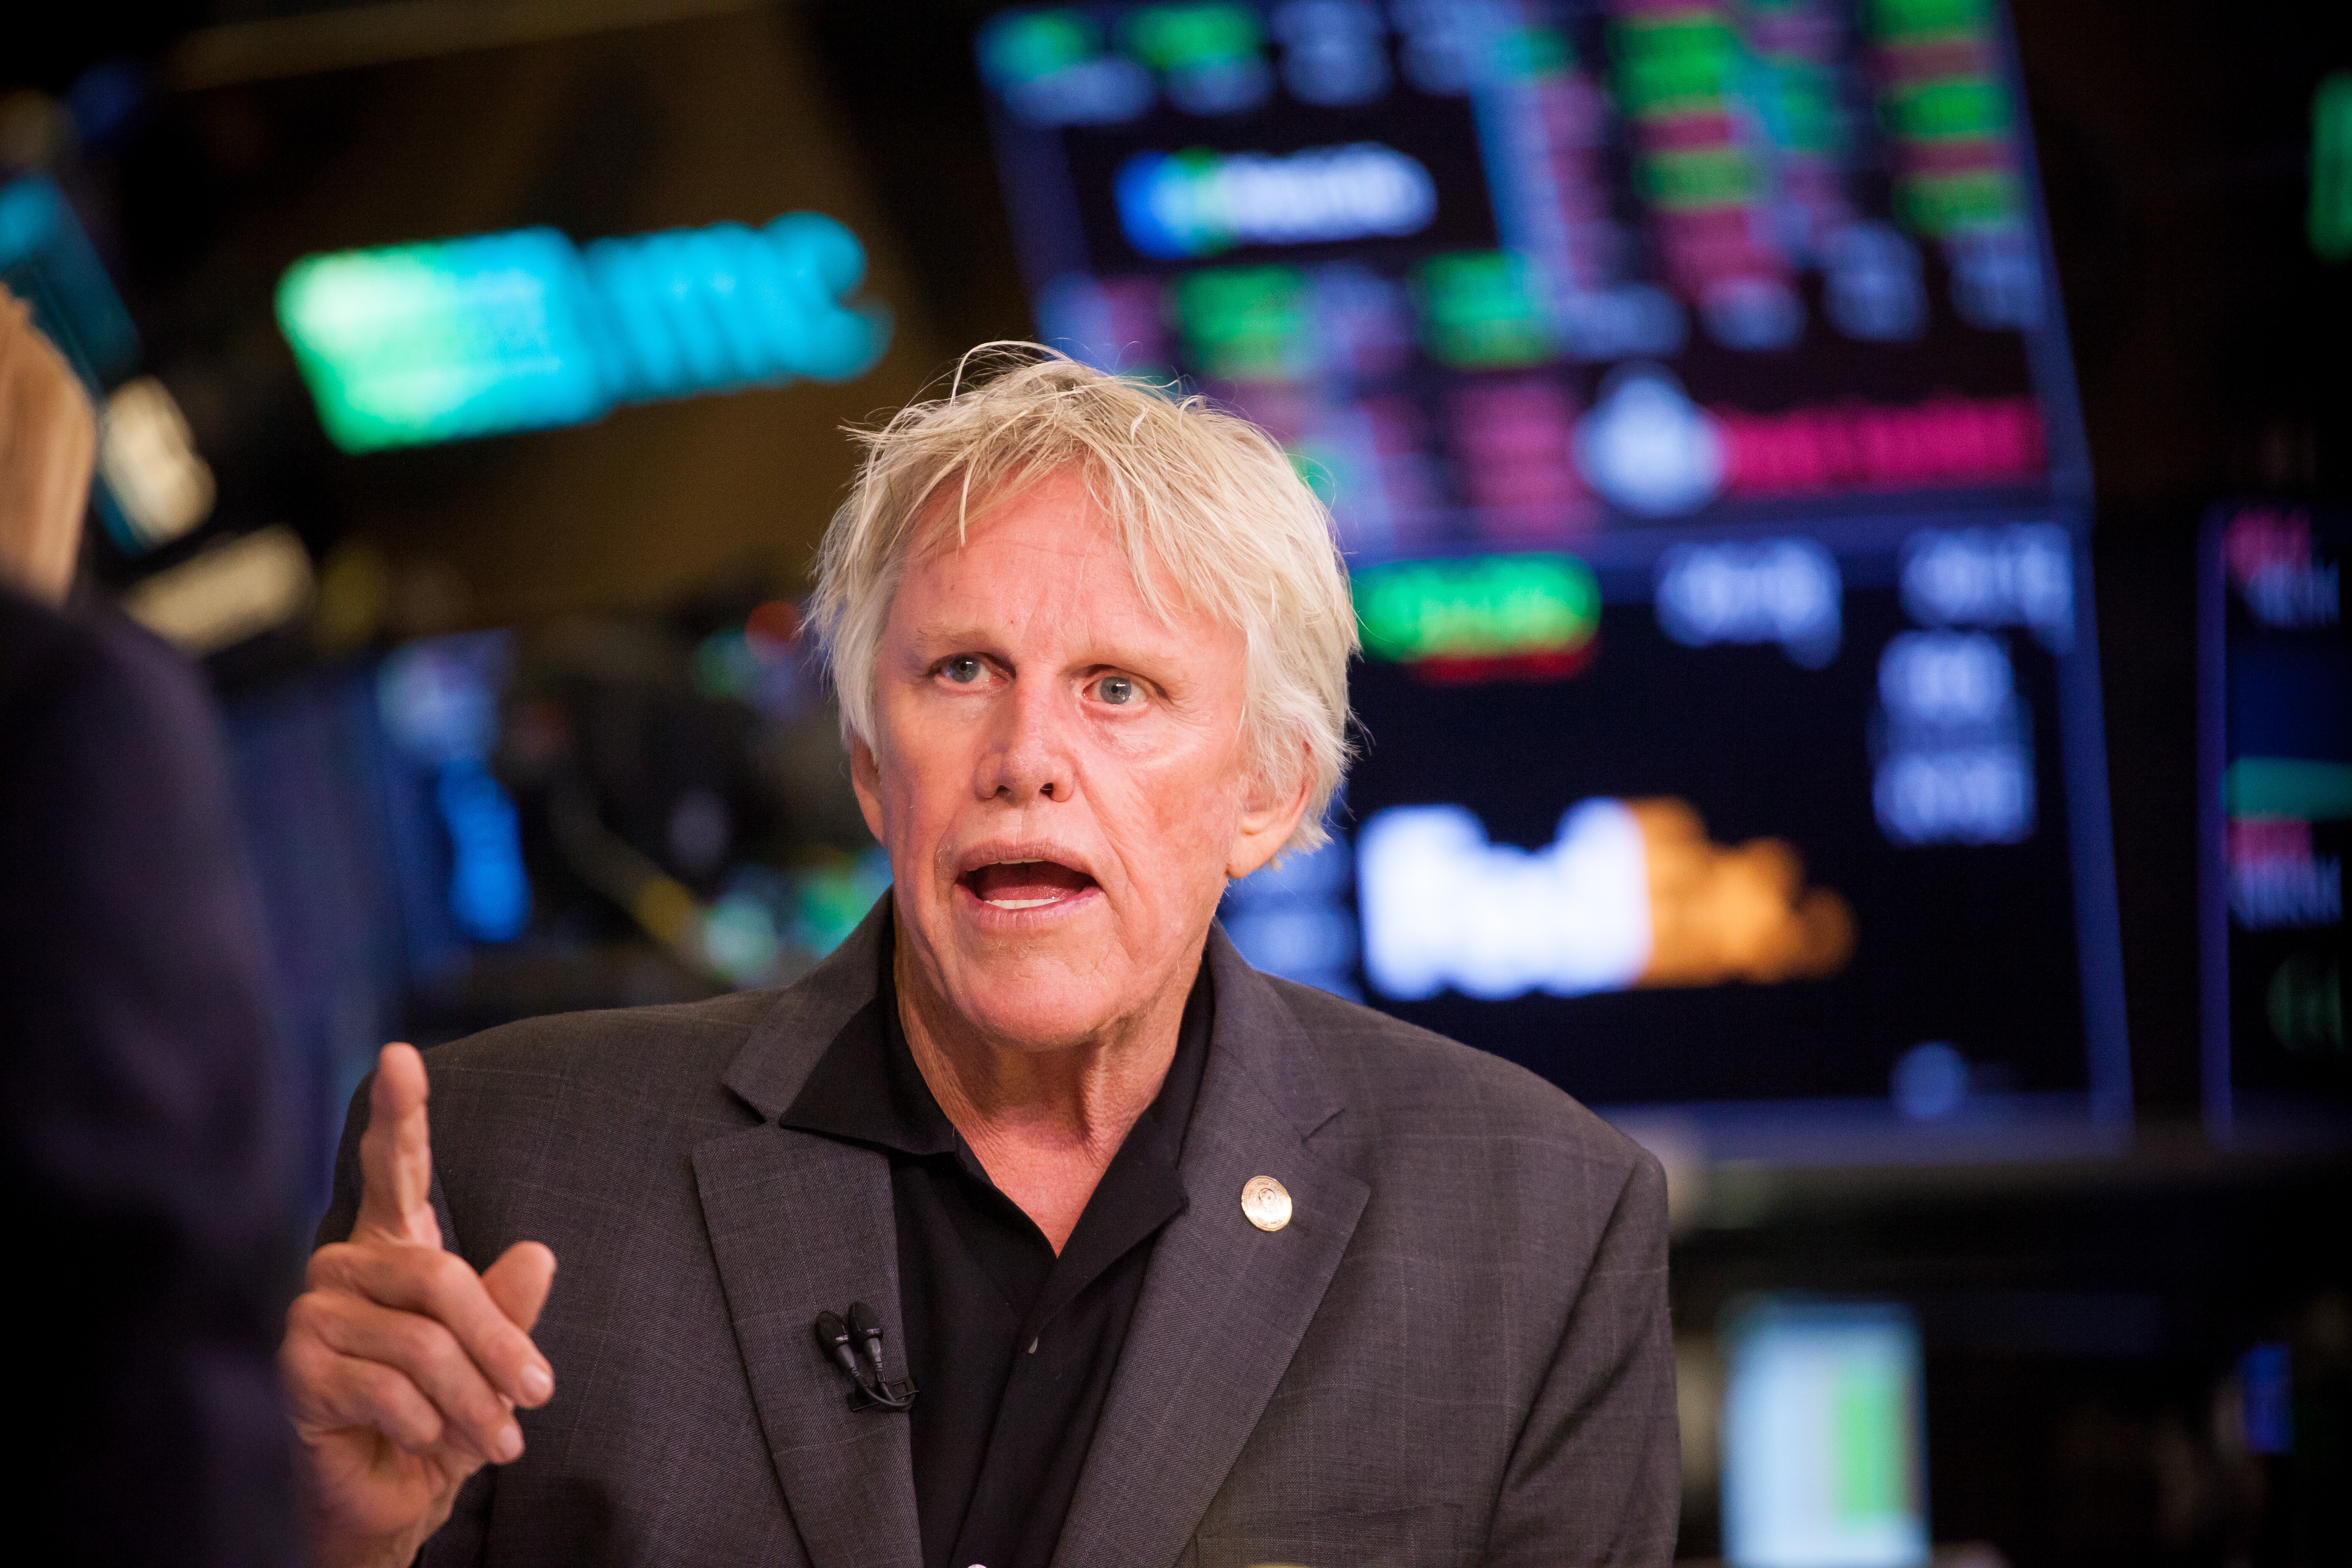 Gary Busey in New York City on September 4, 2018 | Source: Getty Images